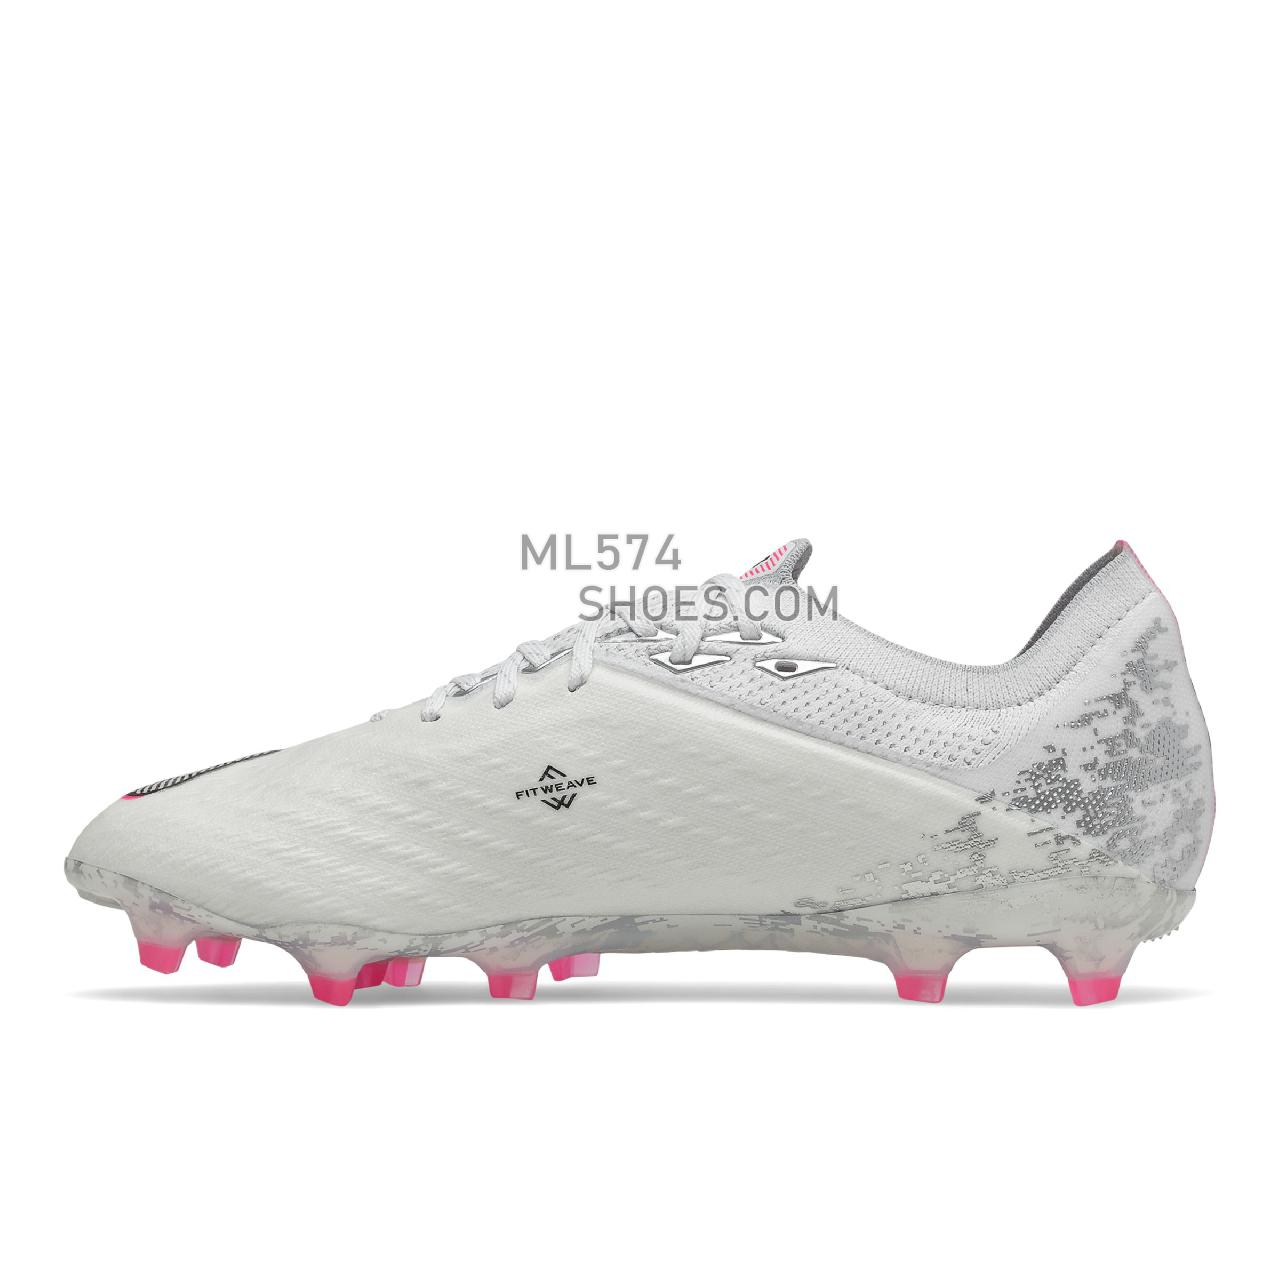 New Balance Furon V6+ Pro FG - Men's Soccer - White with Silver and Alpha Pink - MSF1FP65